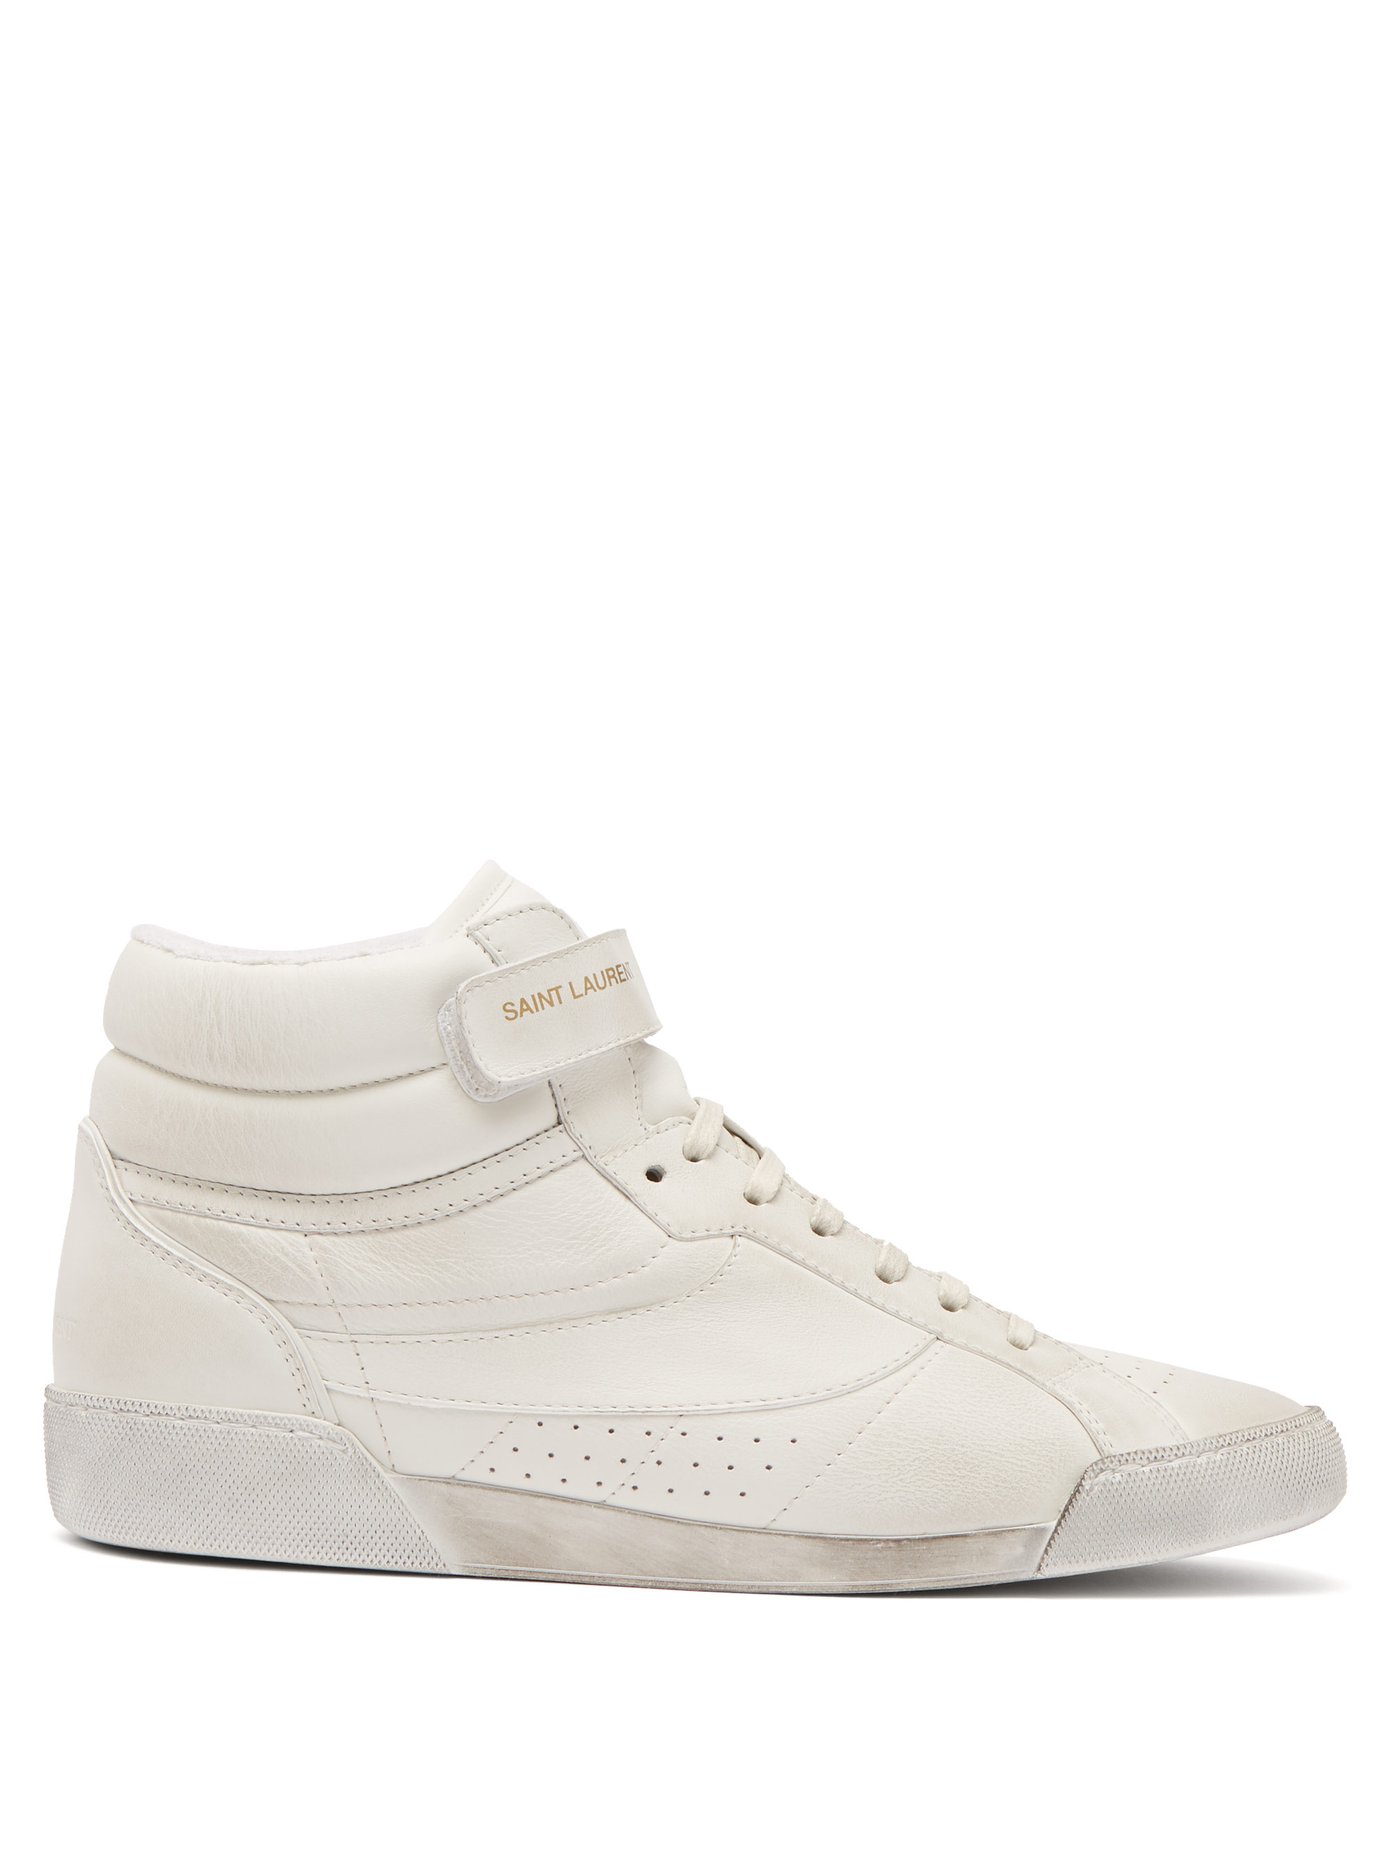 Lenny high-top leather trainers | Saint 